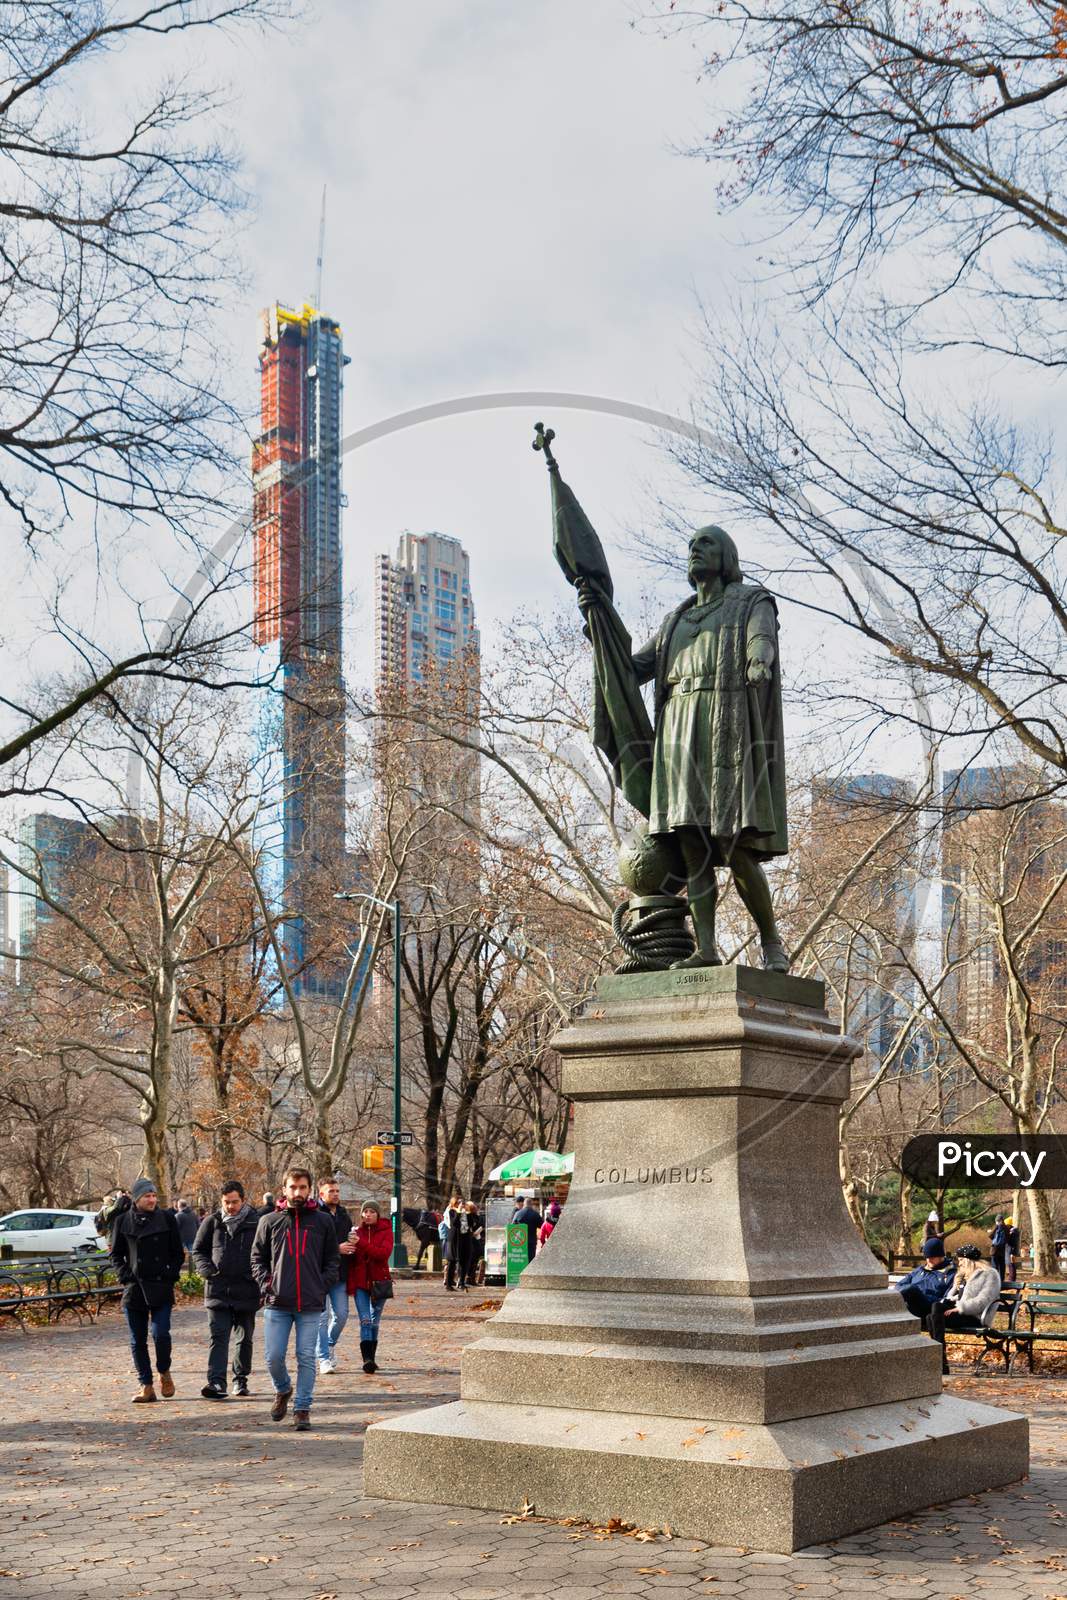 Christopher Columbus Statue (by  Jeronimo Suol)  in Central park New York city daylight view with trees and clouds in sky